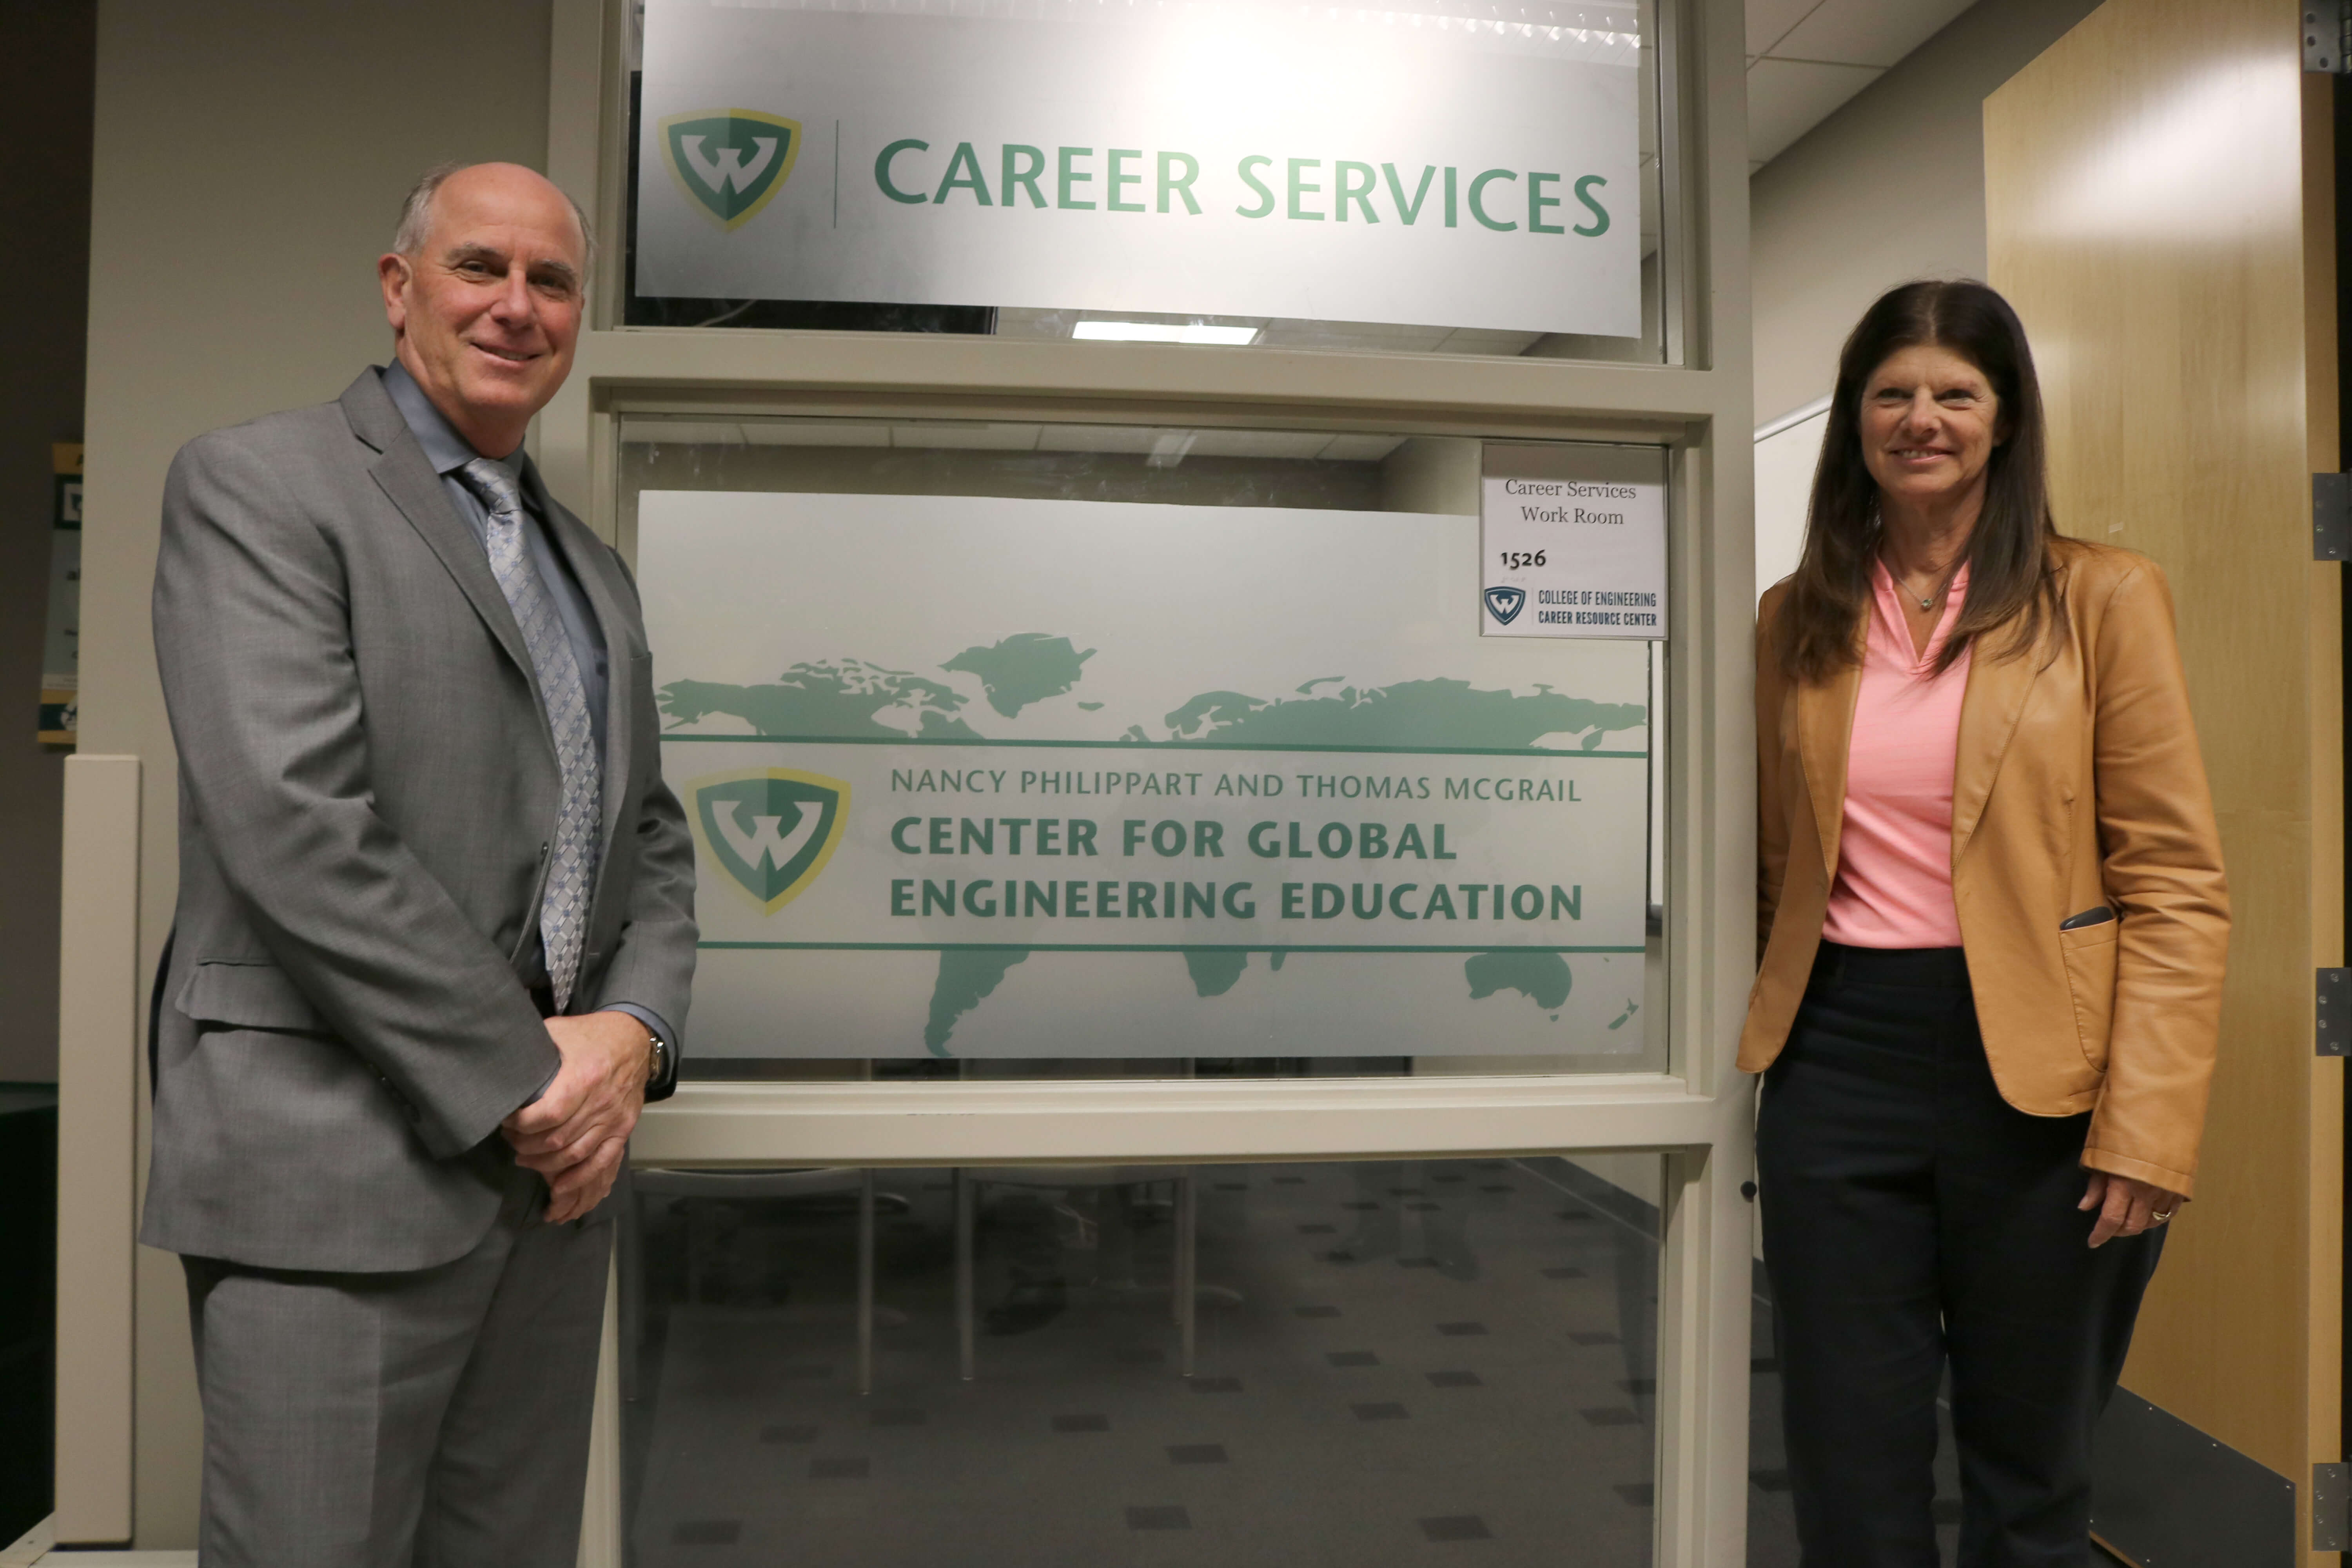 Nancy Philippart and Thomas McGrail Center for Global Engineering Education